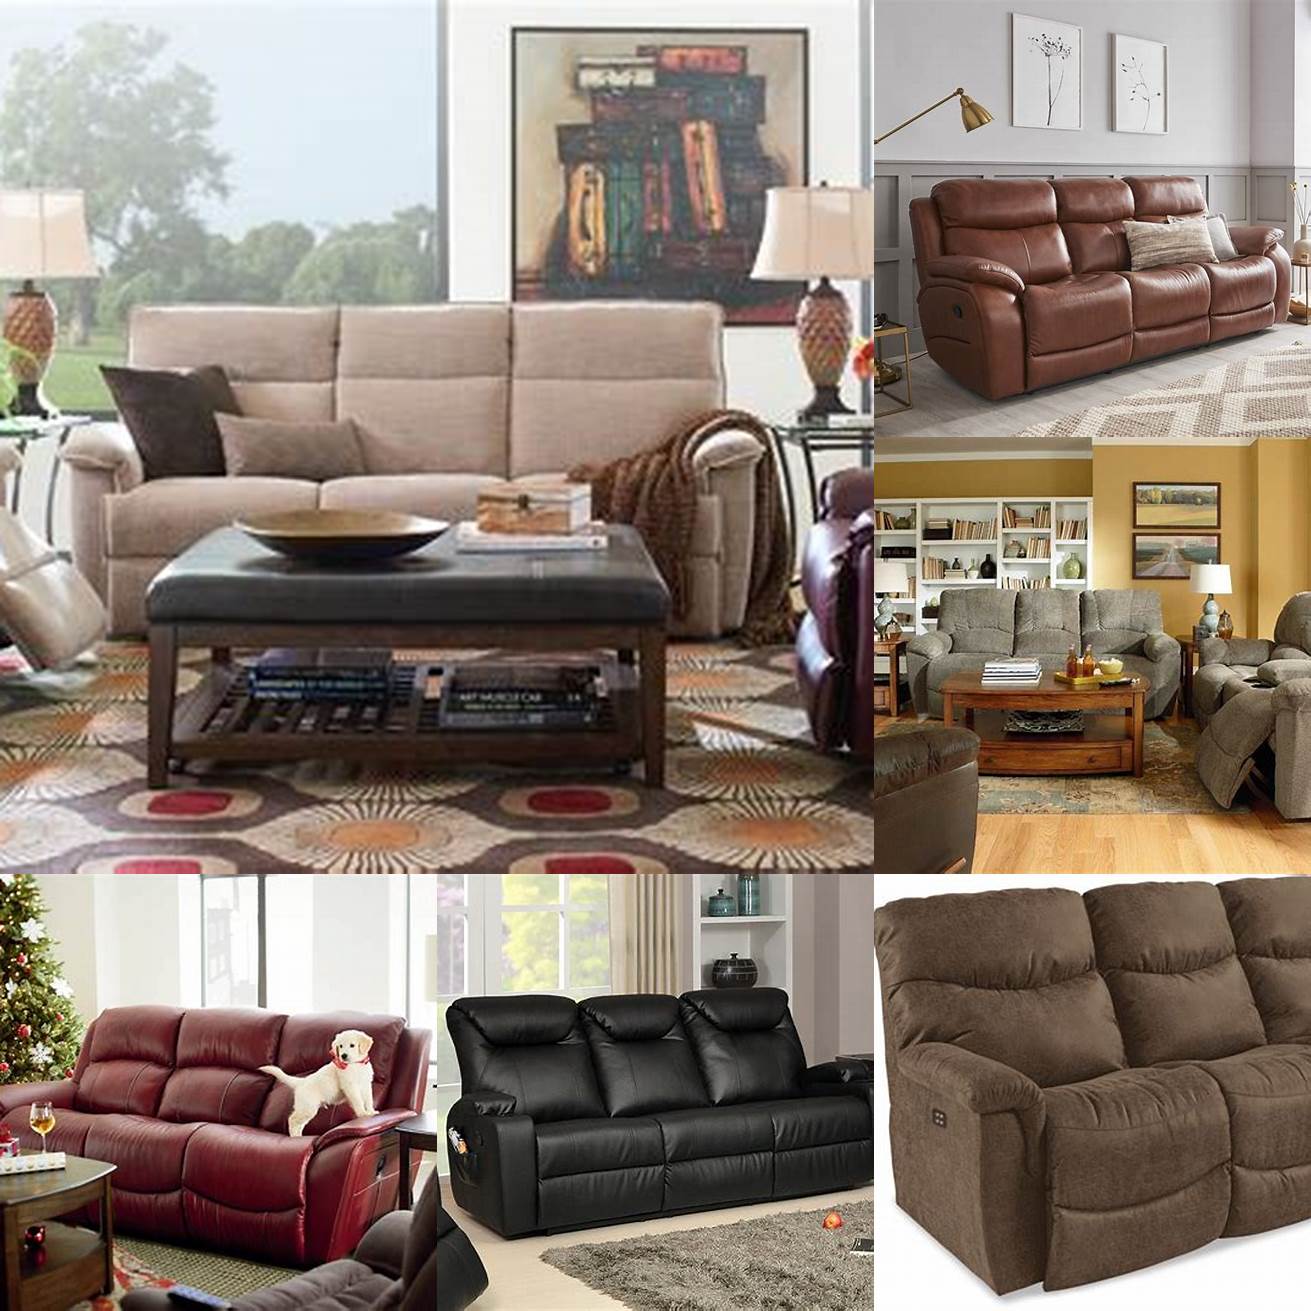 The Lazy Boy Reclining Sofa in a family room setting